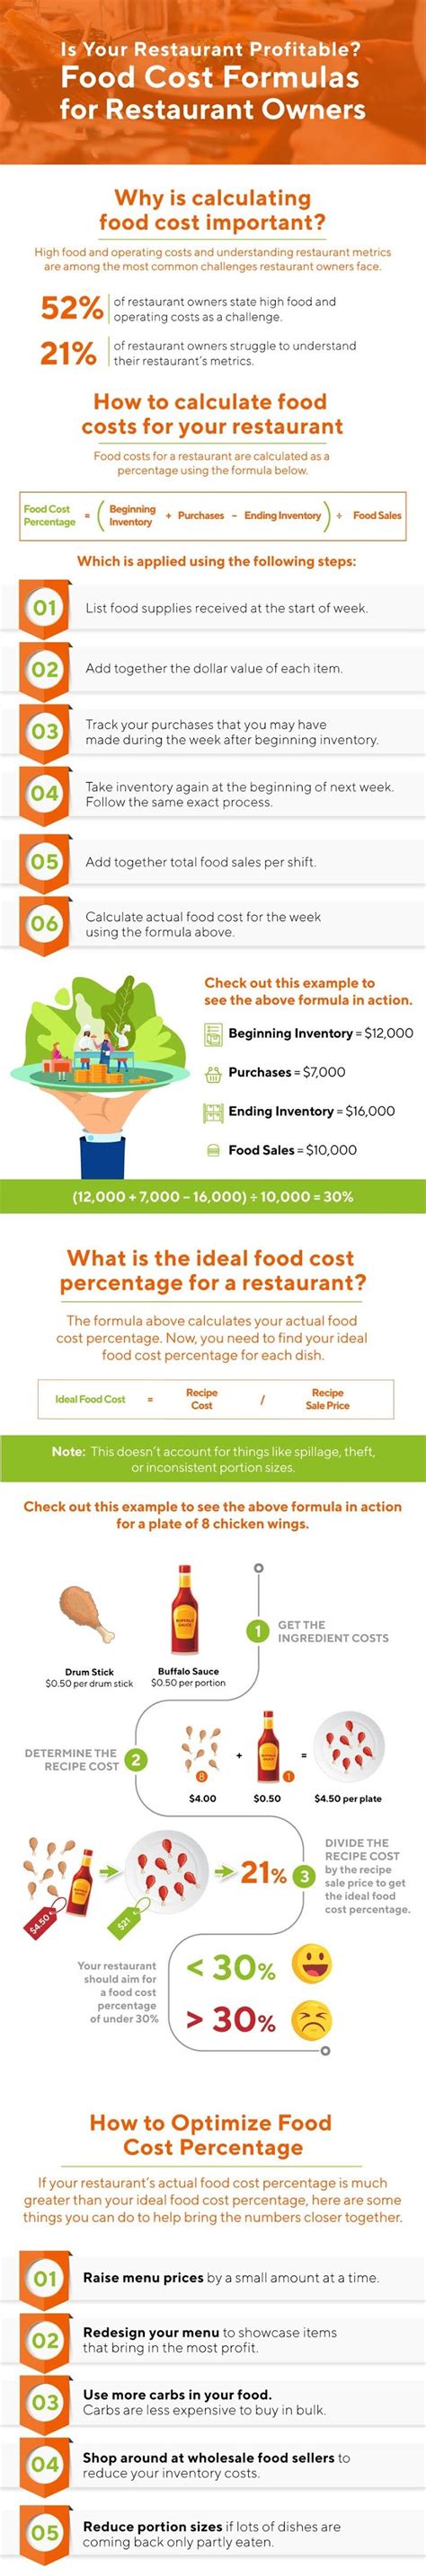 Putting these figures into the above formula, we can see that the restaurant's food cost percentage is Younglistan